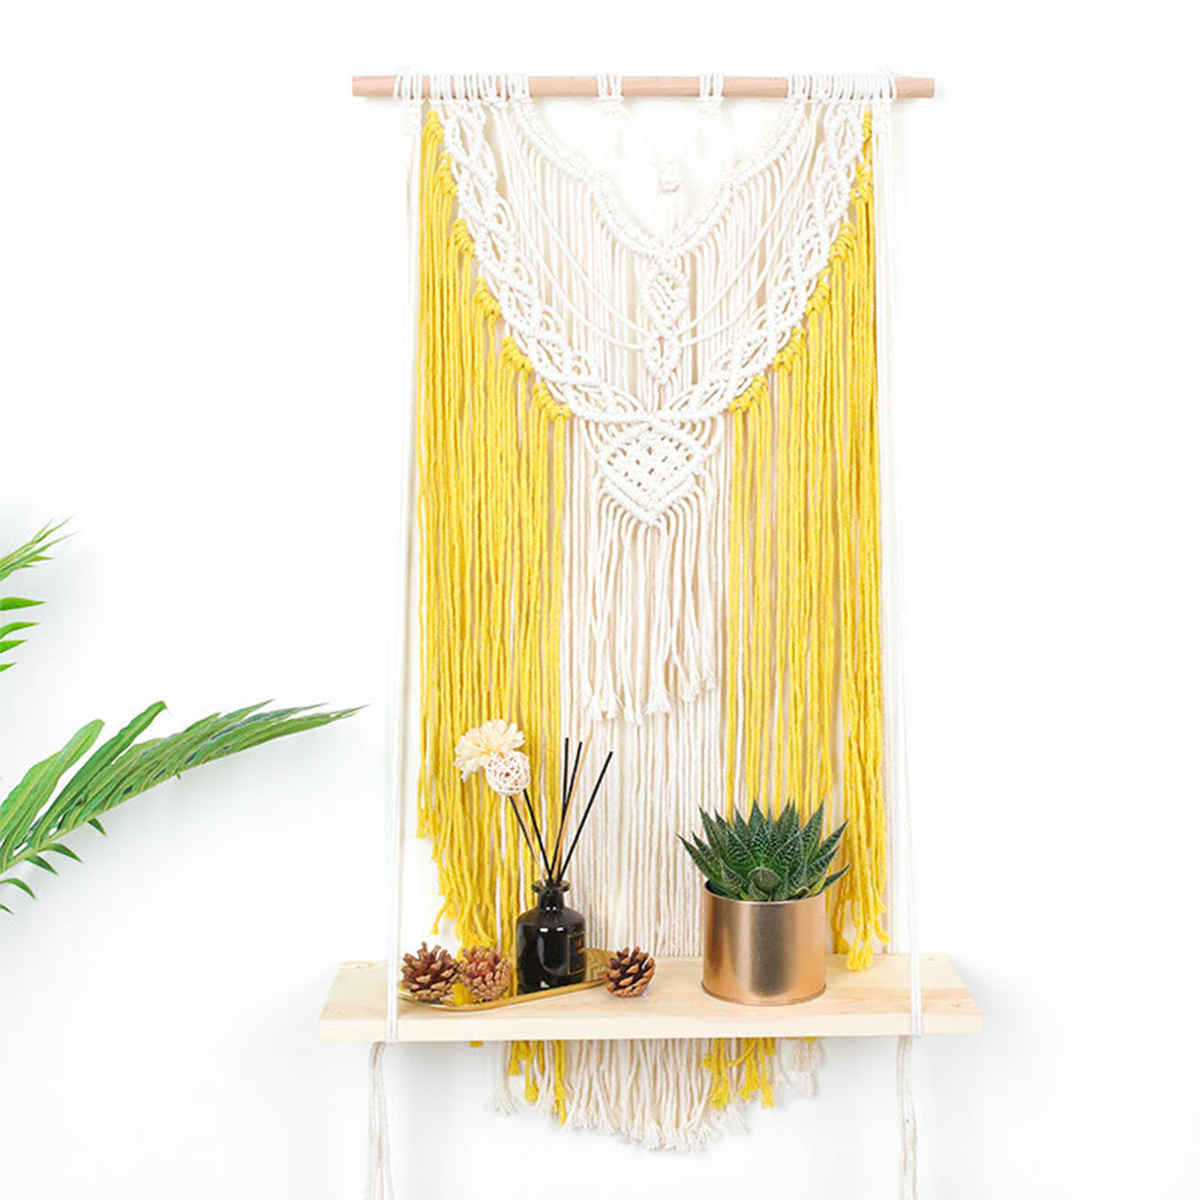 Wall-mounted-Lace-Woven-Macrame-Plant-Hanger-Wall-Cotton-Rope-Tapestry-Shelf-1727270-3